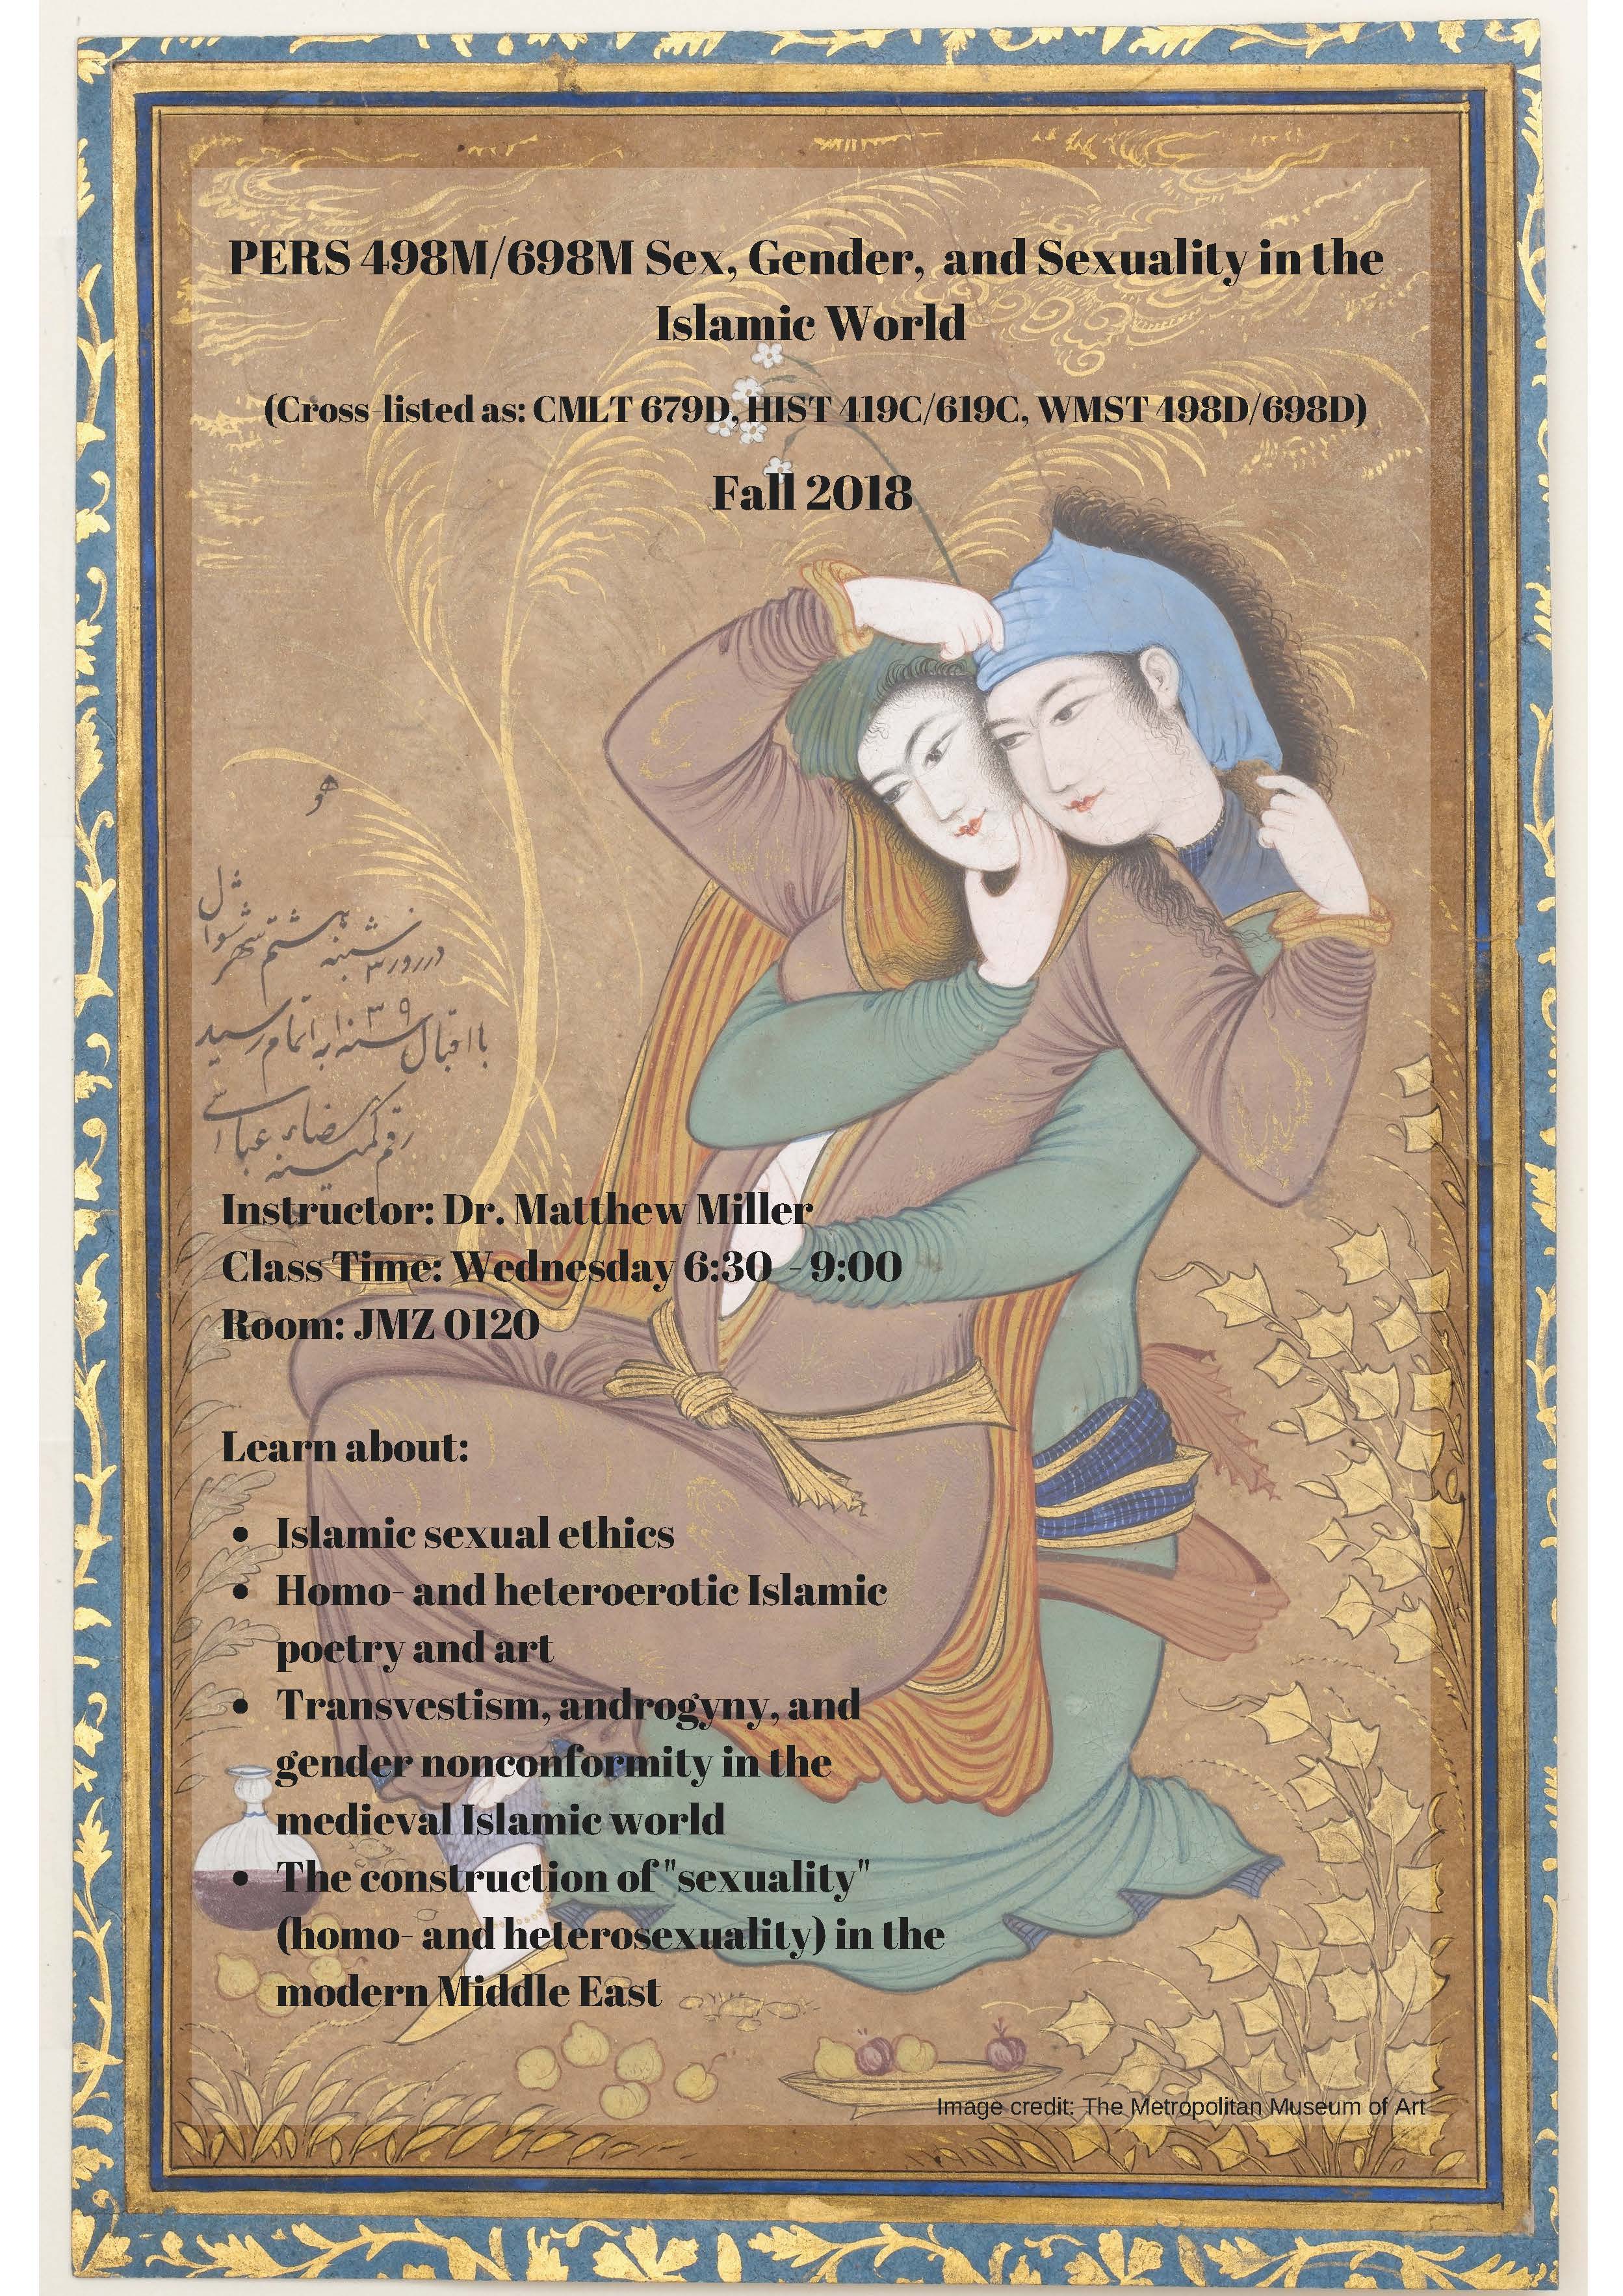 Sex, Gender, and Sexuality in the Islamic World, taught by Matthew Thomas Miller